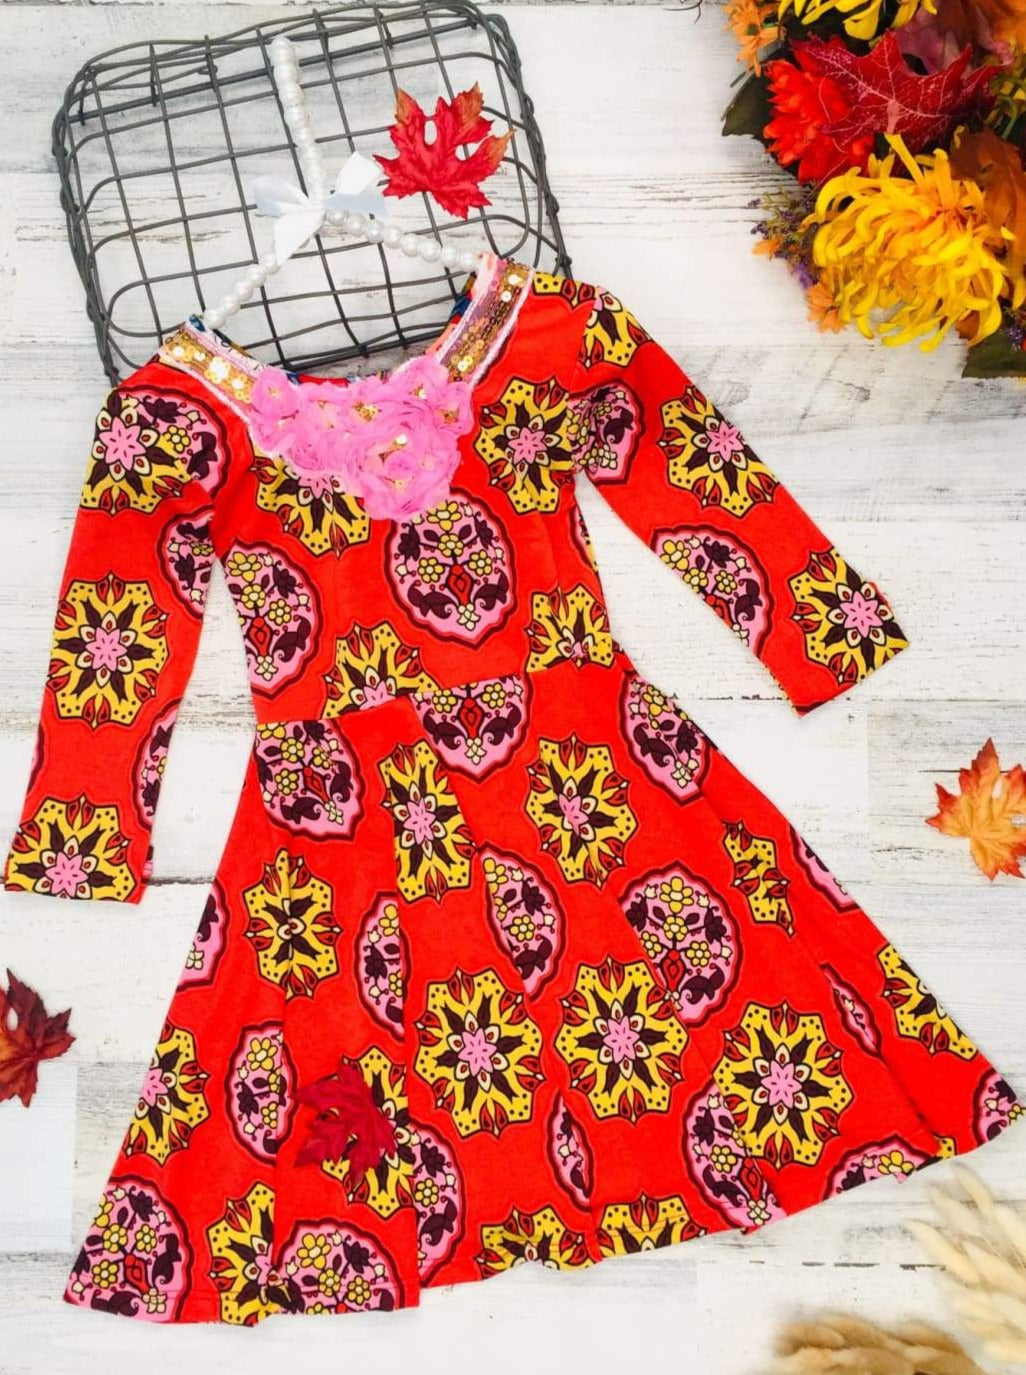 Girls Floral Long Sleeve Scoop Back Dress with Bow - Red / 2T/3T - Girls Fall Casual Dress